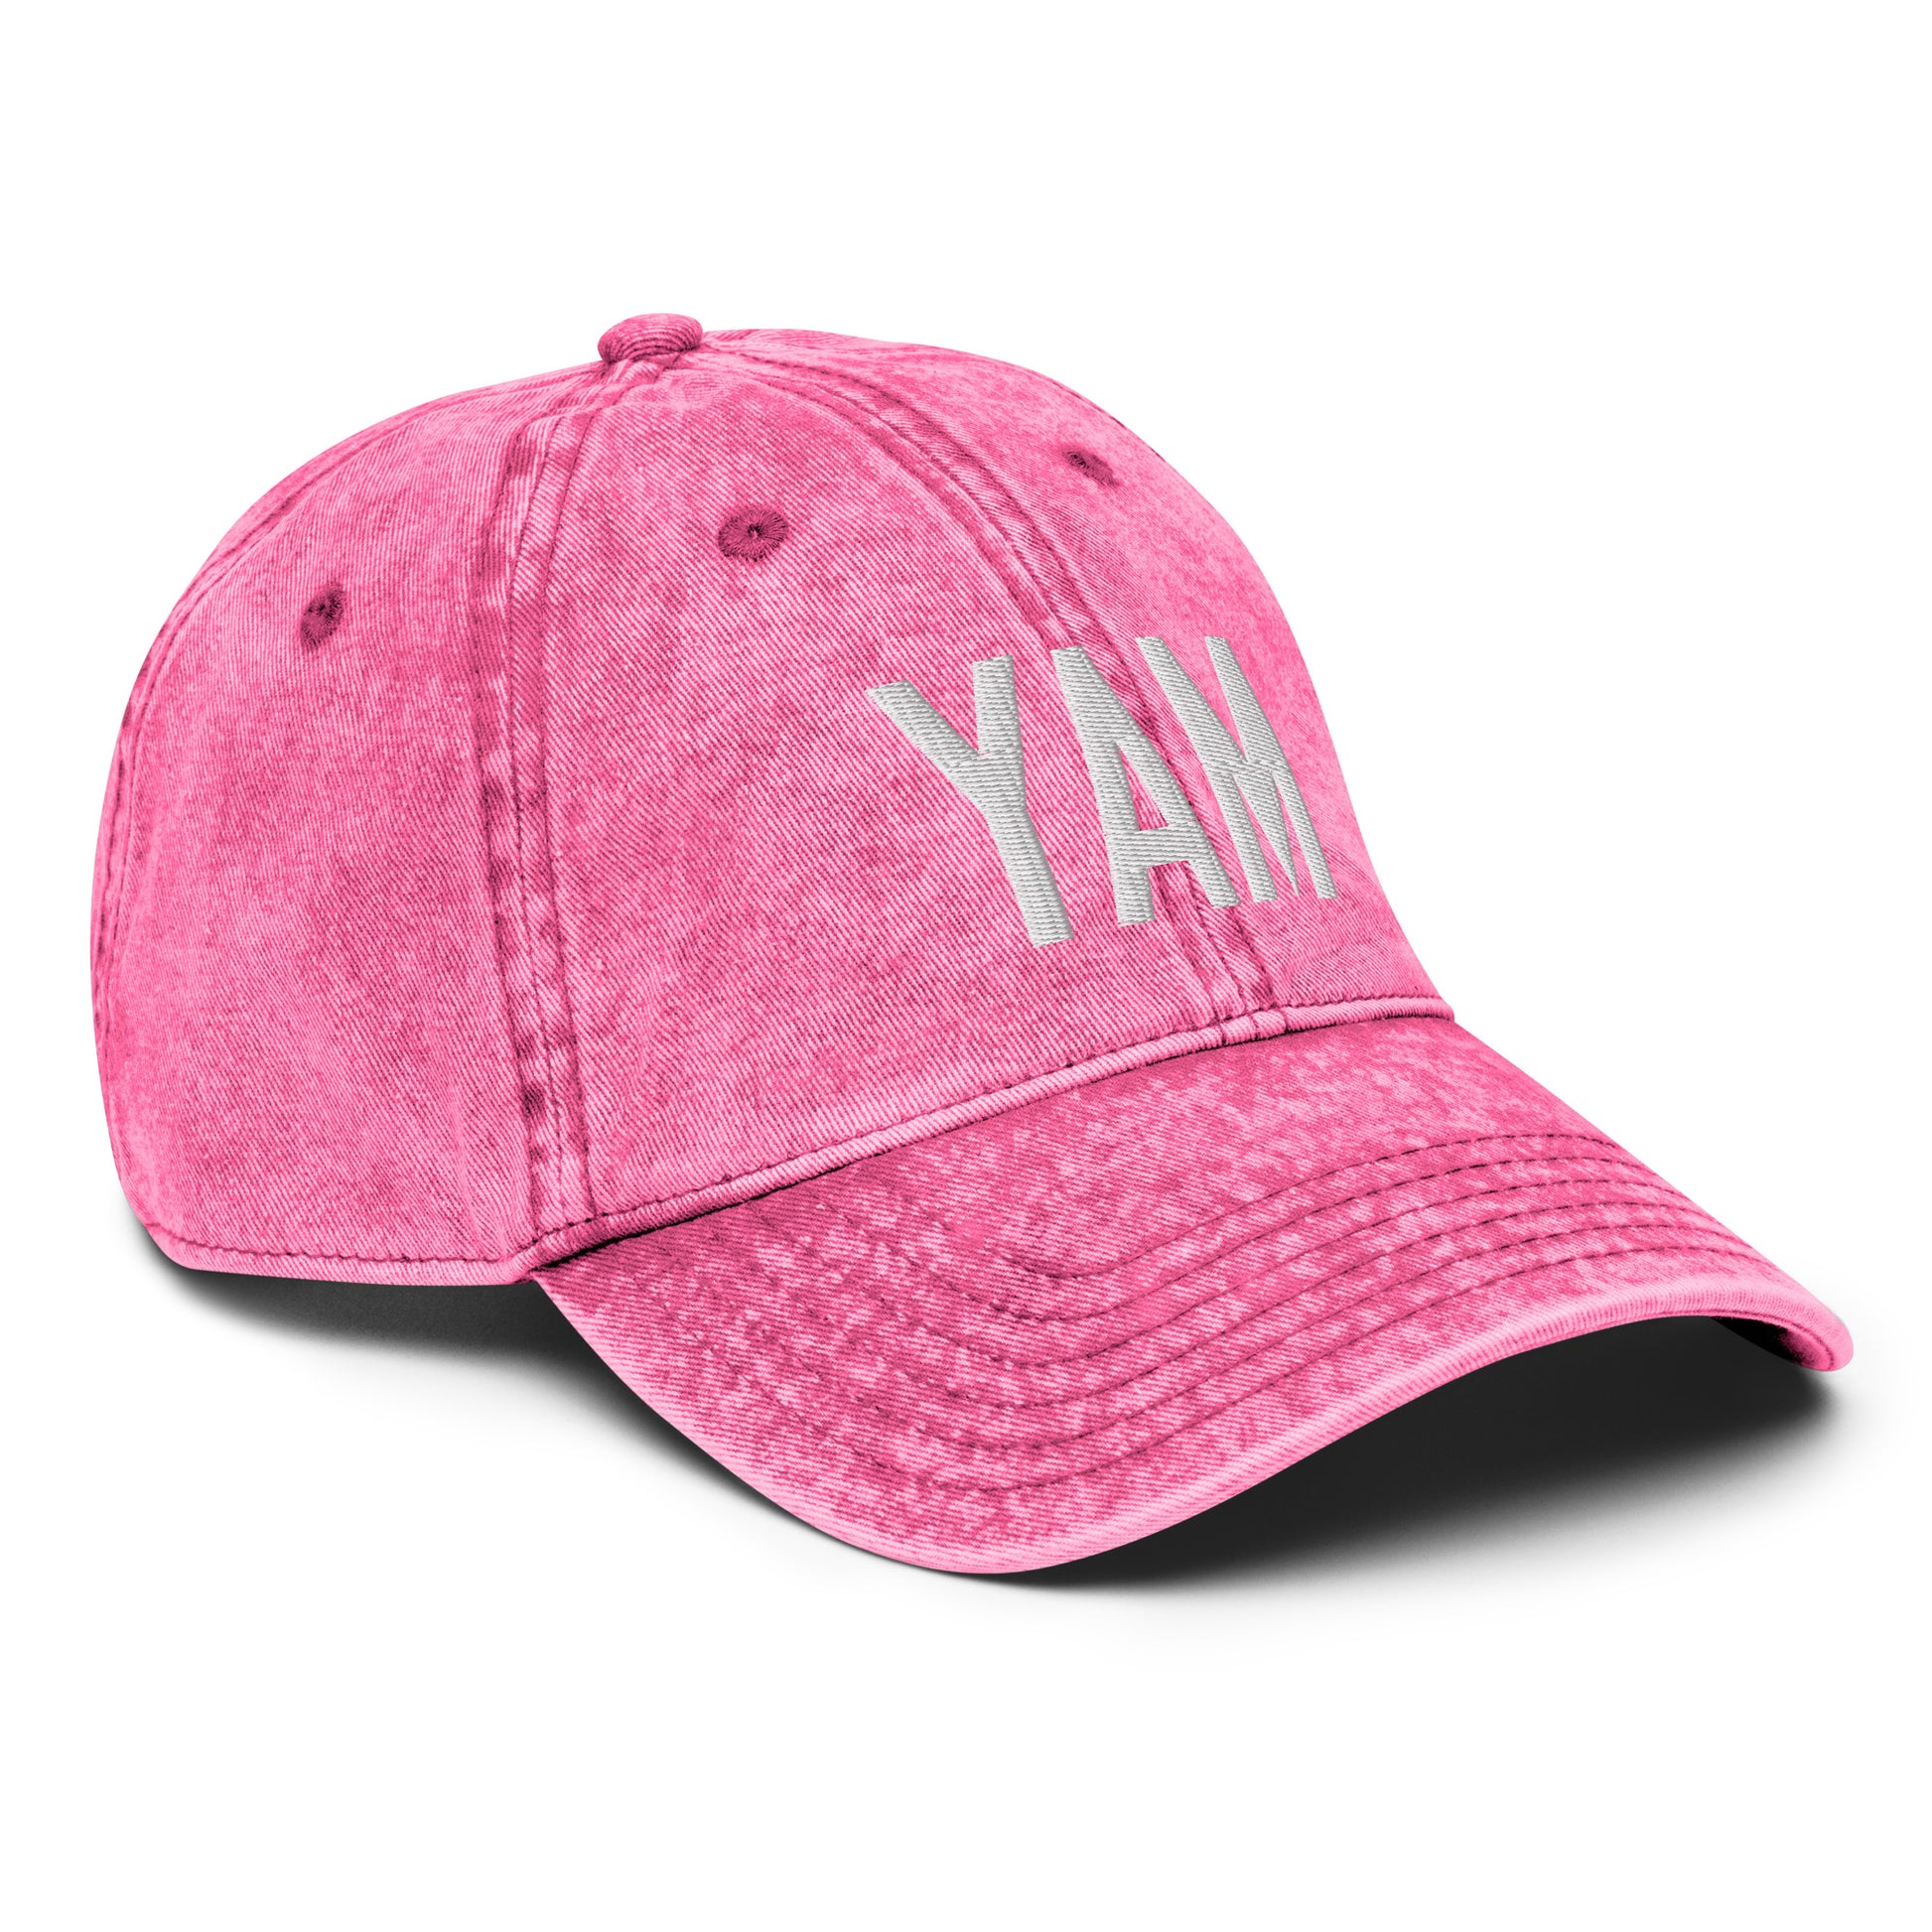 Airport Code Twill Cap - White • YAM Sault-Ste-Marie • YHM Designs - Image 27